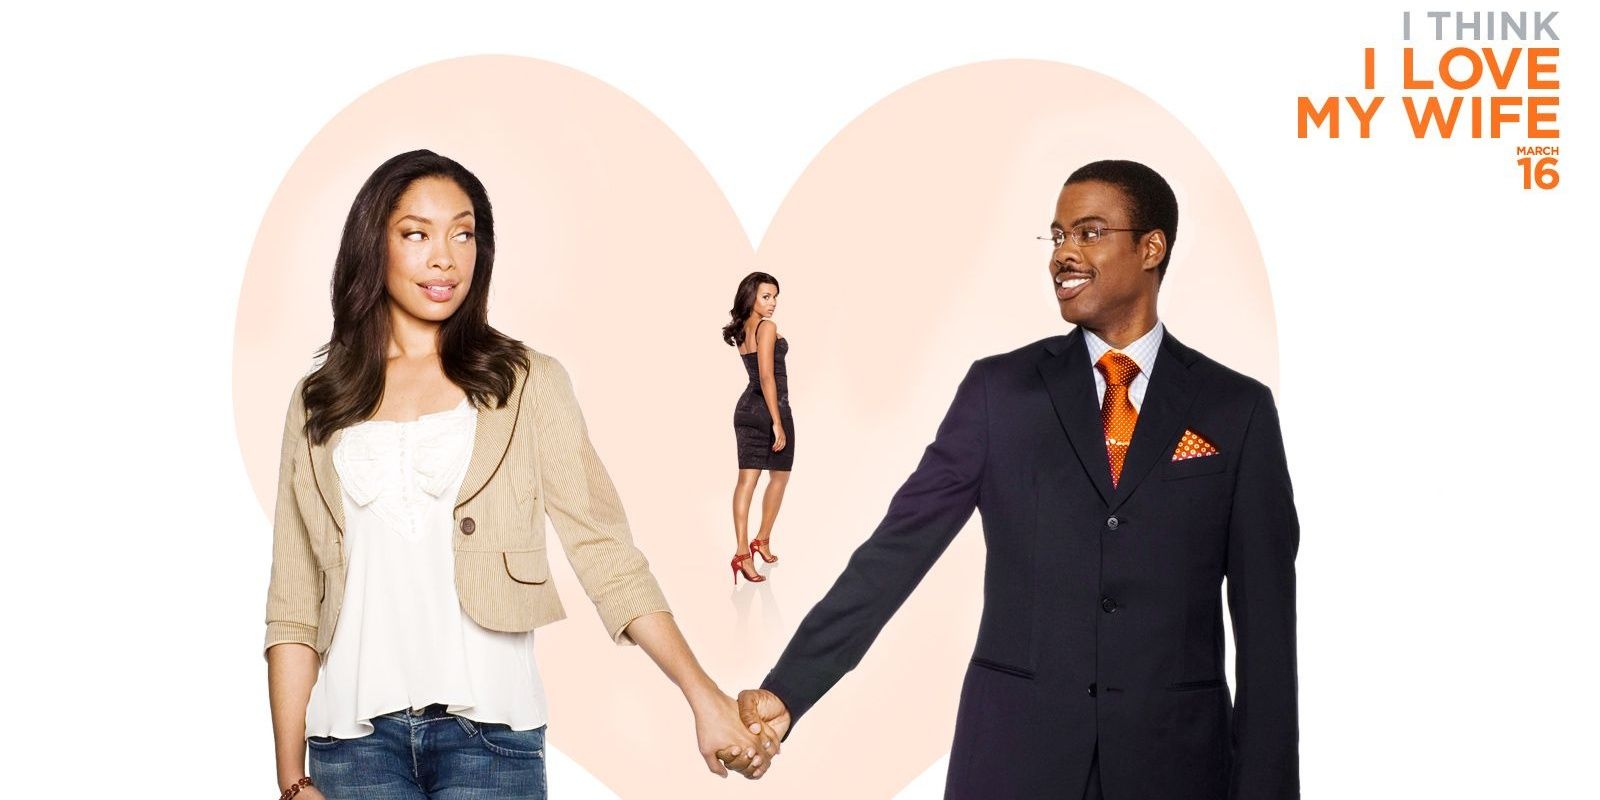 Poster showing Chris Rock holding his wife's hand as a female waits in the background in I Think I Love My Wife.